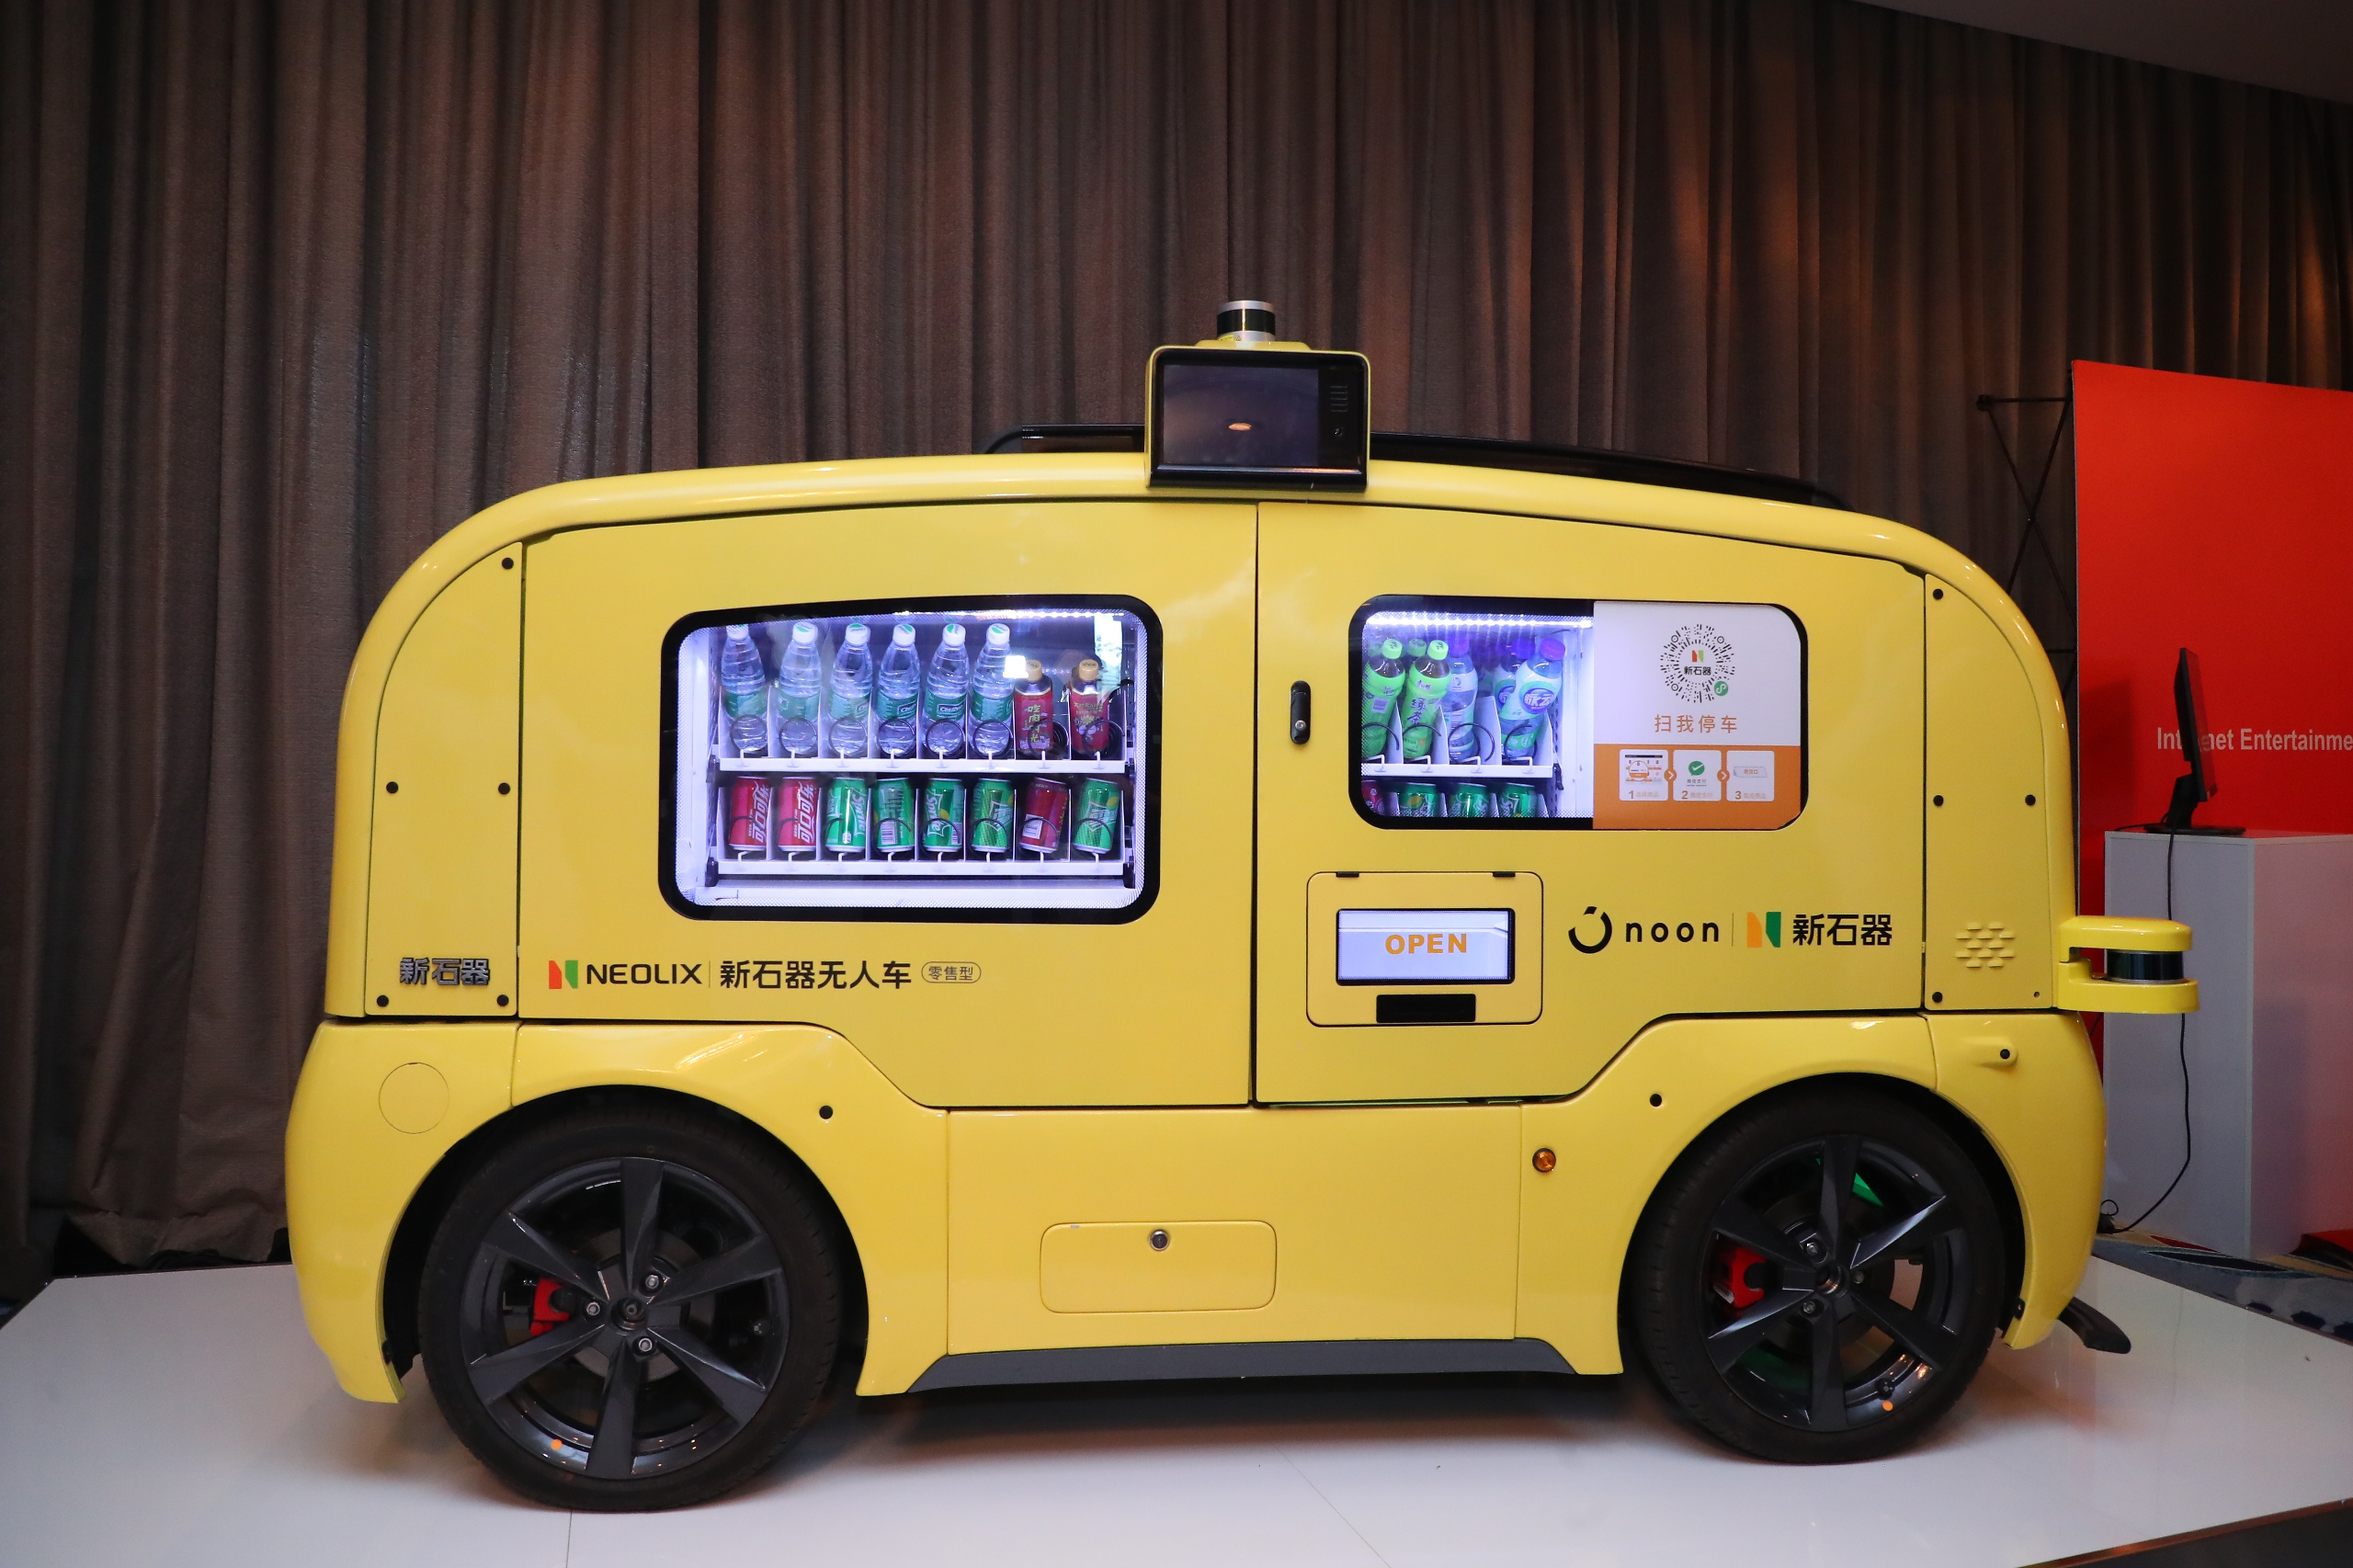 Middle Eastern e-commerce company Noon buys 5,000 self-driving vans from Chinese startup Neolix to deliver grocery